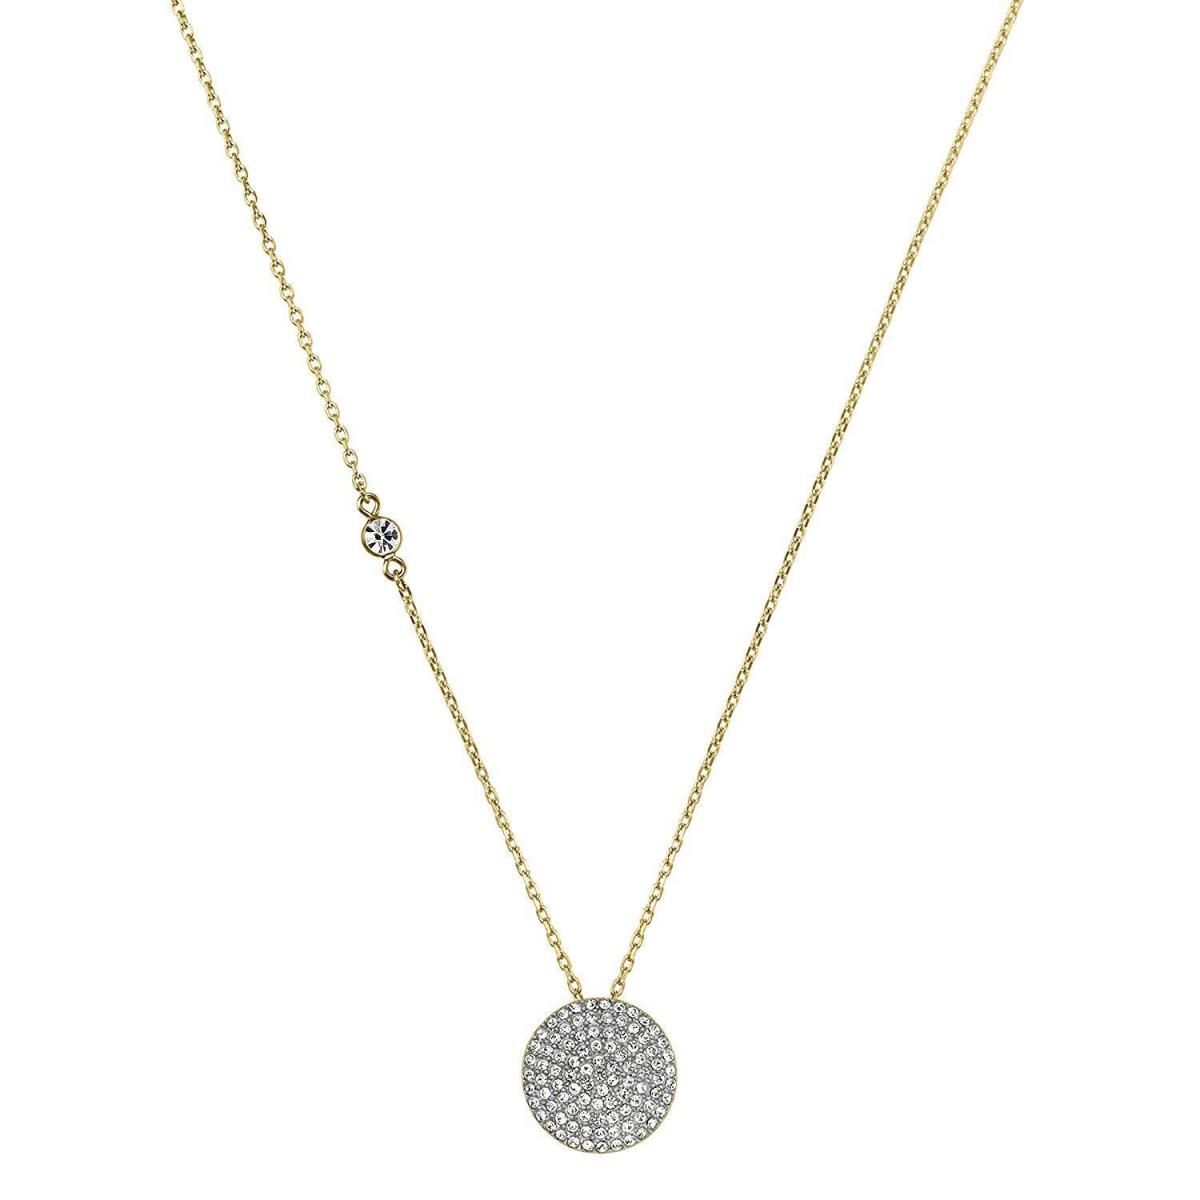 Michael Kors Gold Tone Chain Crystal Pave Disk Pendant Necklace MKJ3908